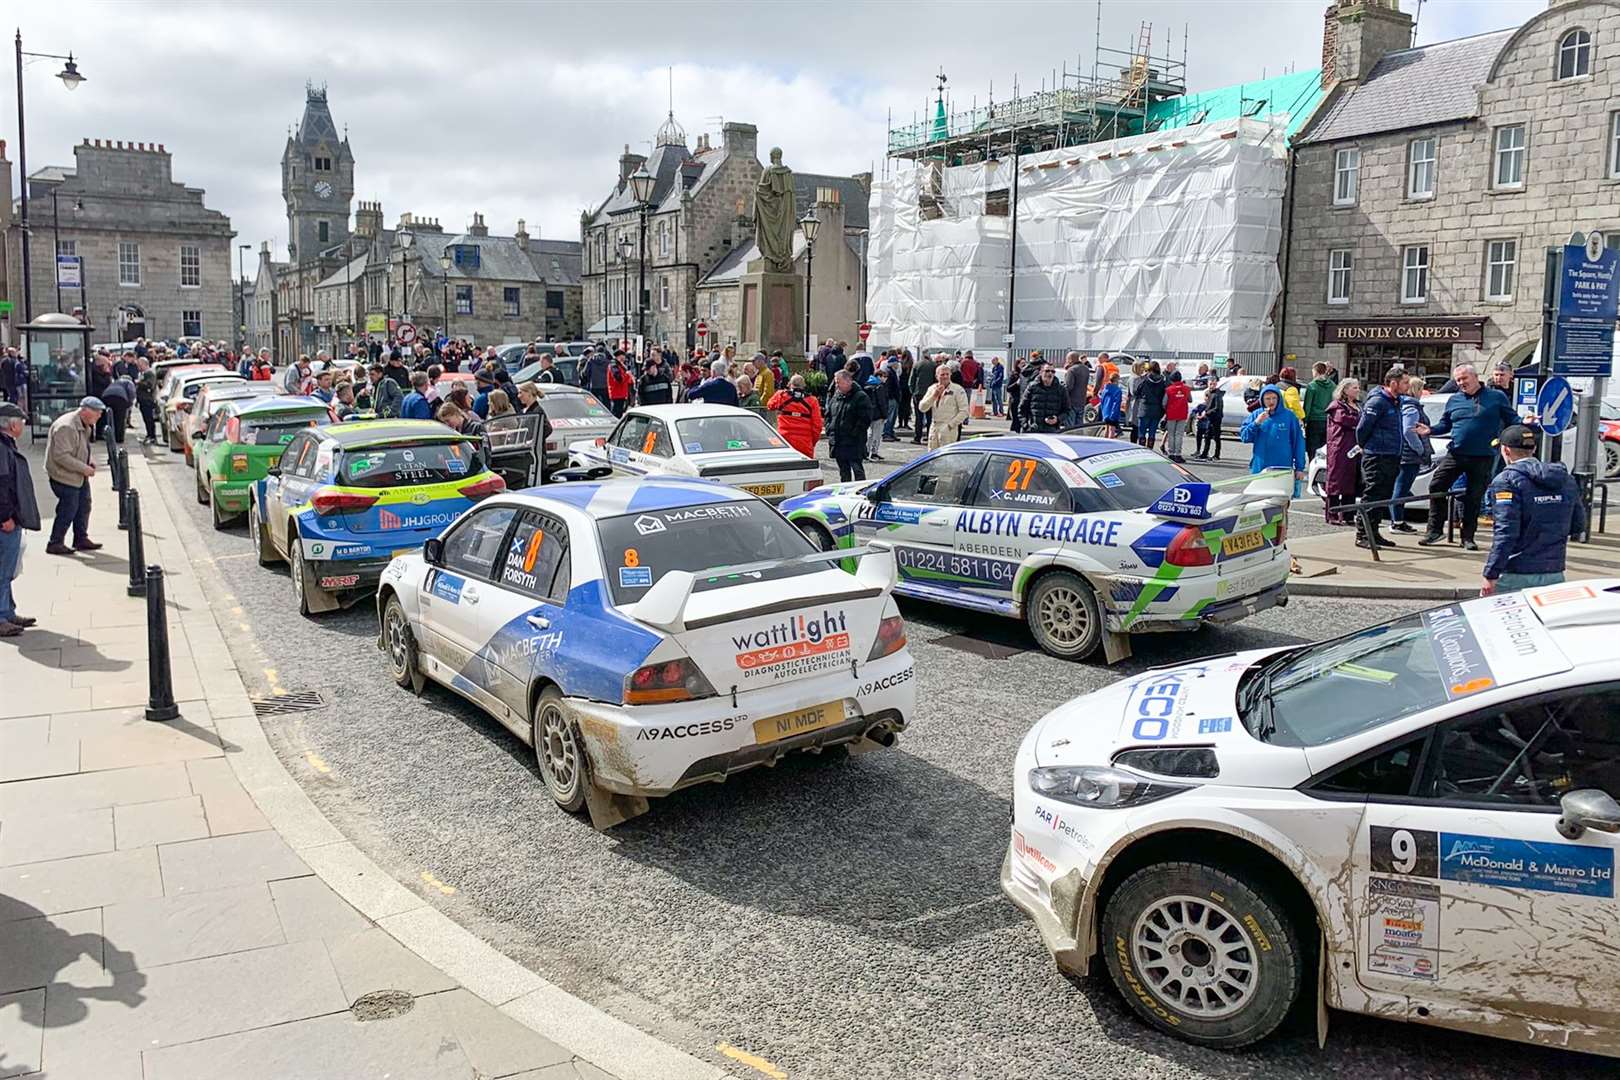 People flocked to The Square to see the rally cars. Picture: Daniel Forsyth.